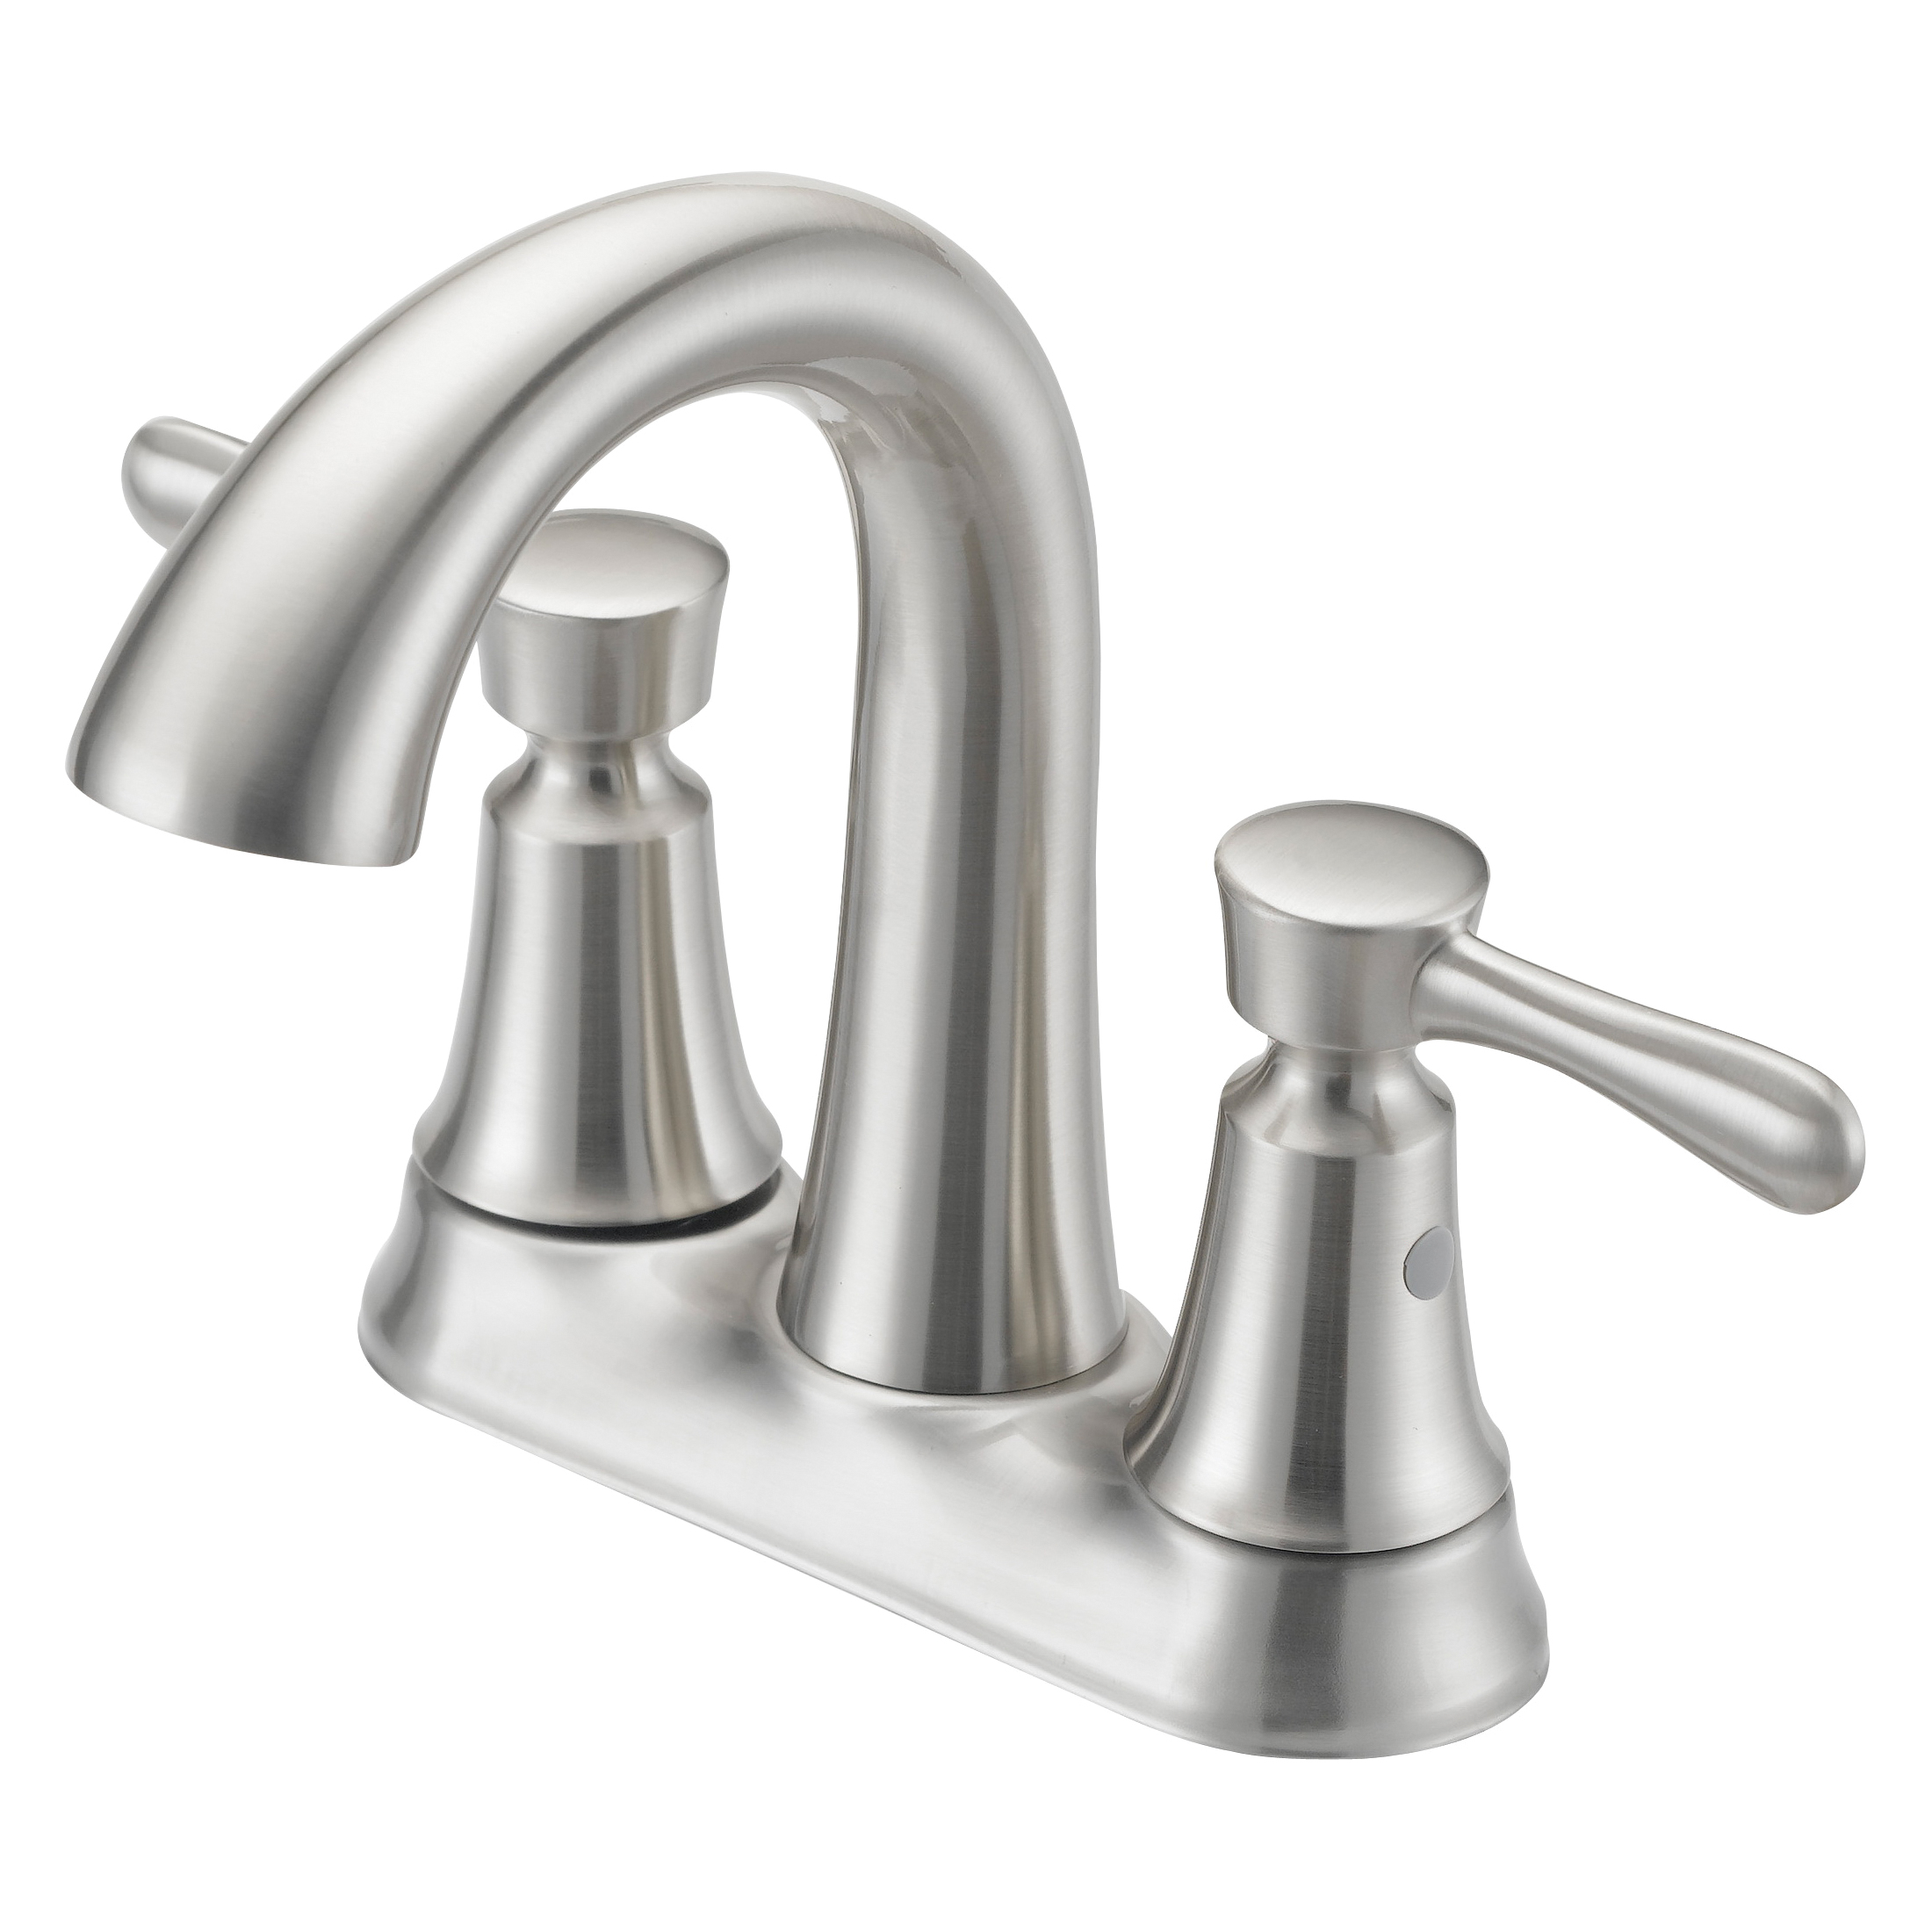 Boston Harbor F51B0035NP Lavatory Faucet, 1.2 gpm, 2-Faucet Handle, 3-Faucet Hole, Metal/Plastic, Brushed Nickel